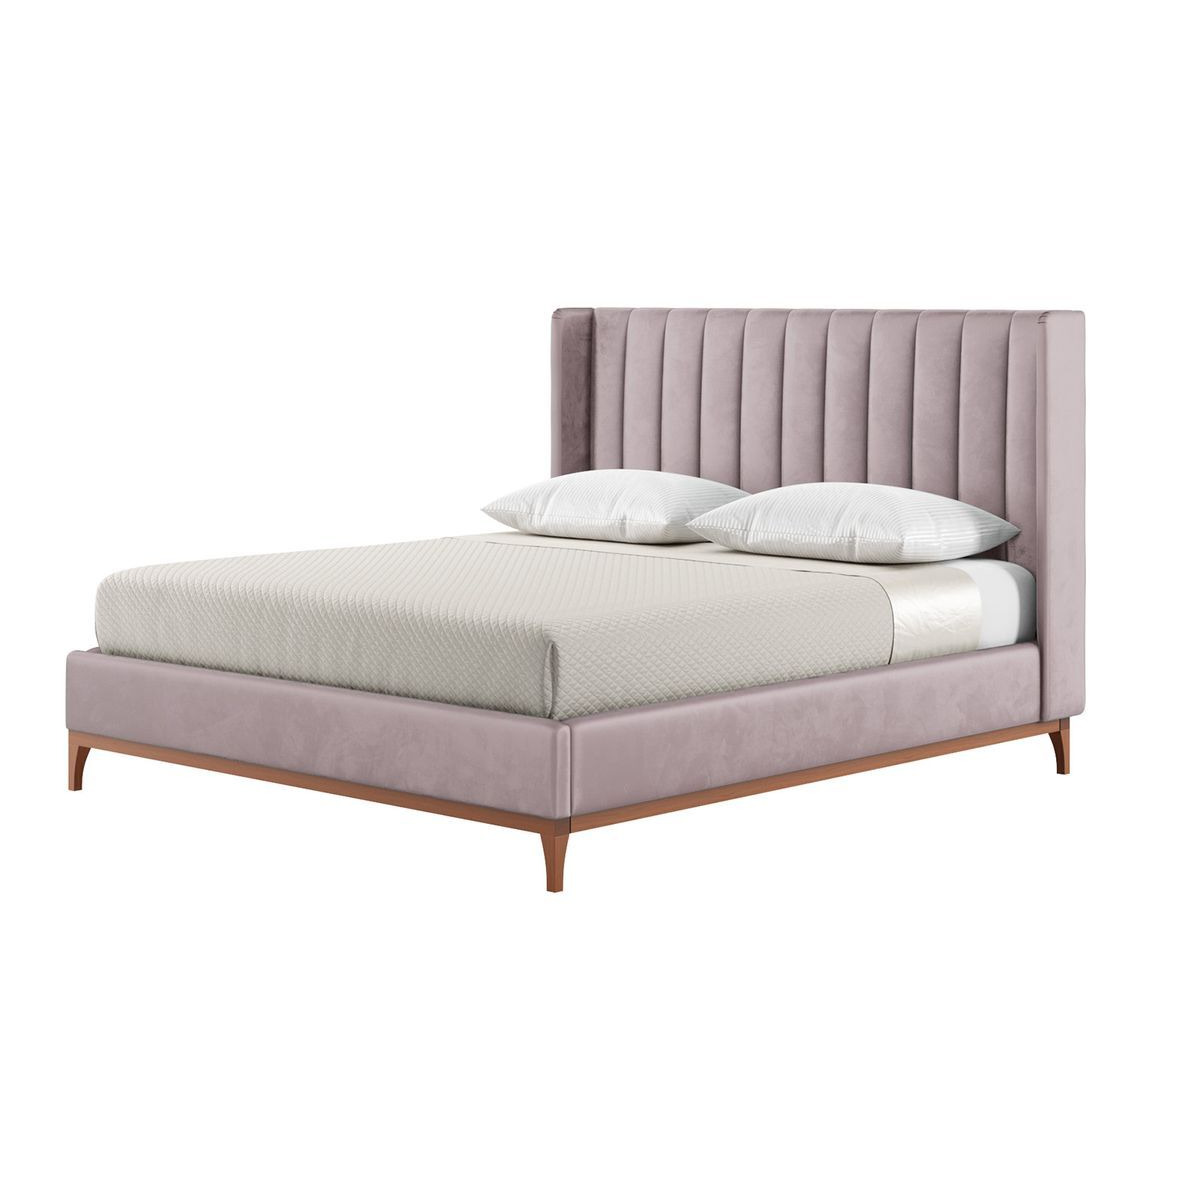 Reese 6ft Super King Size Bed Frame with fluted vertical stitch wing headboard, lilac, Leg colour: aveo - image 1